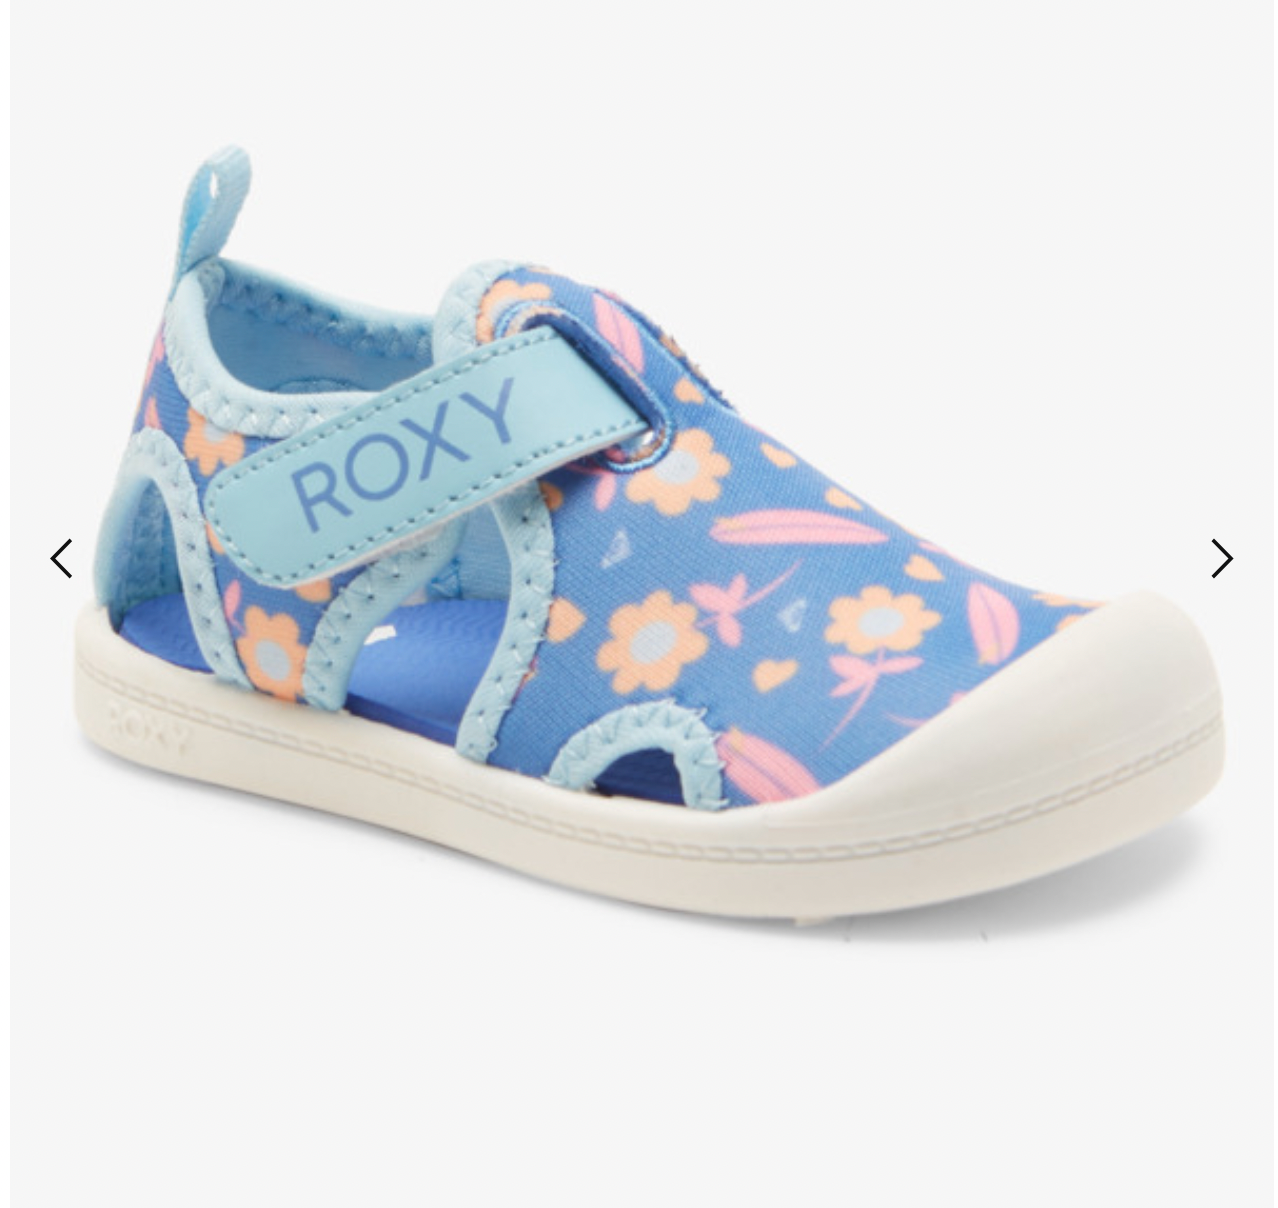 ROXY Grom - Slip-On Shoes for Toddlers